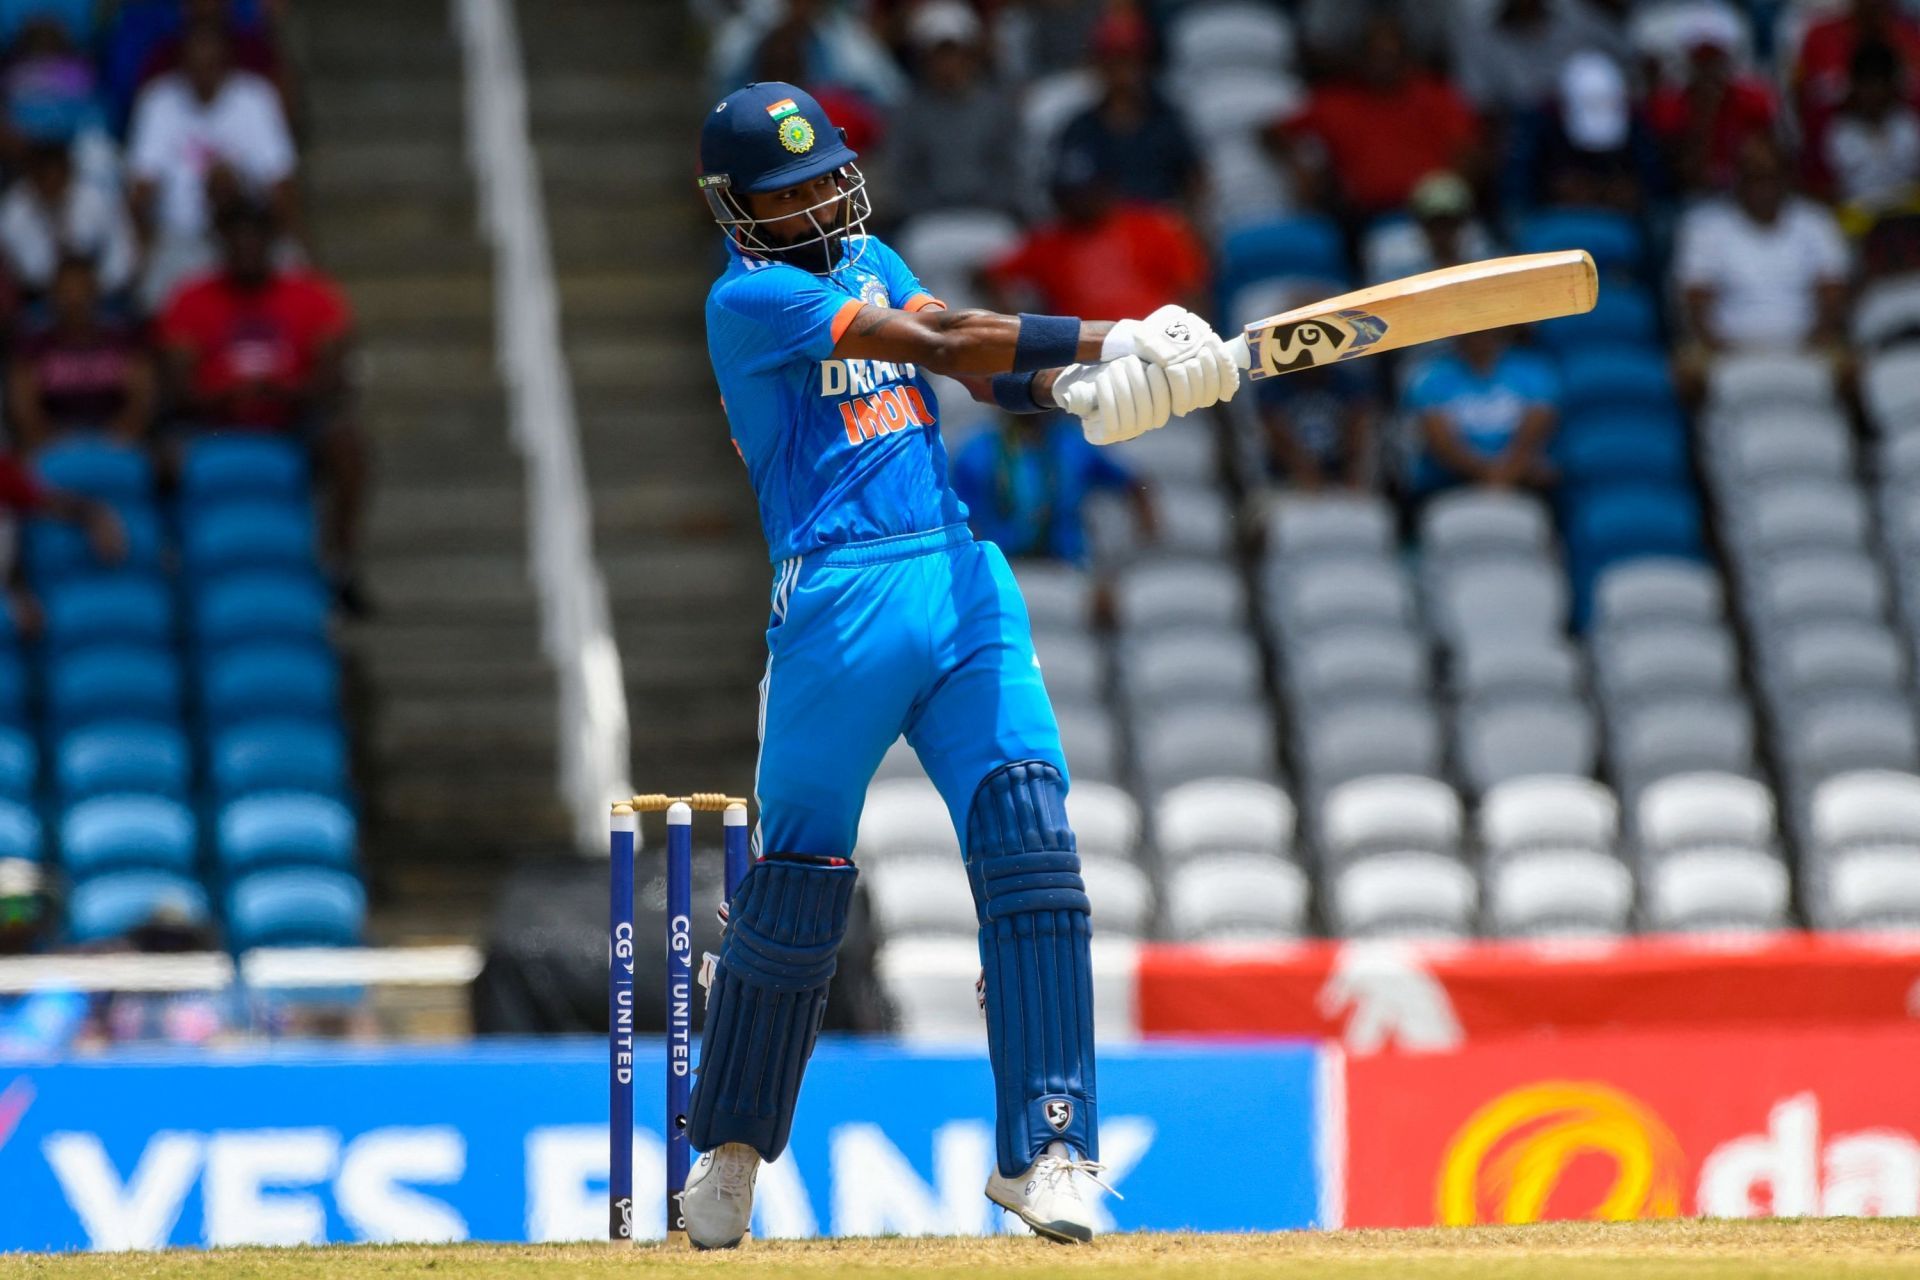 Hardik Pandya played a calculated knock in the third ODI against the West Indies. [P/C: BCCI]